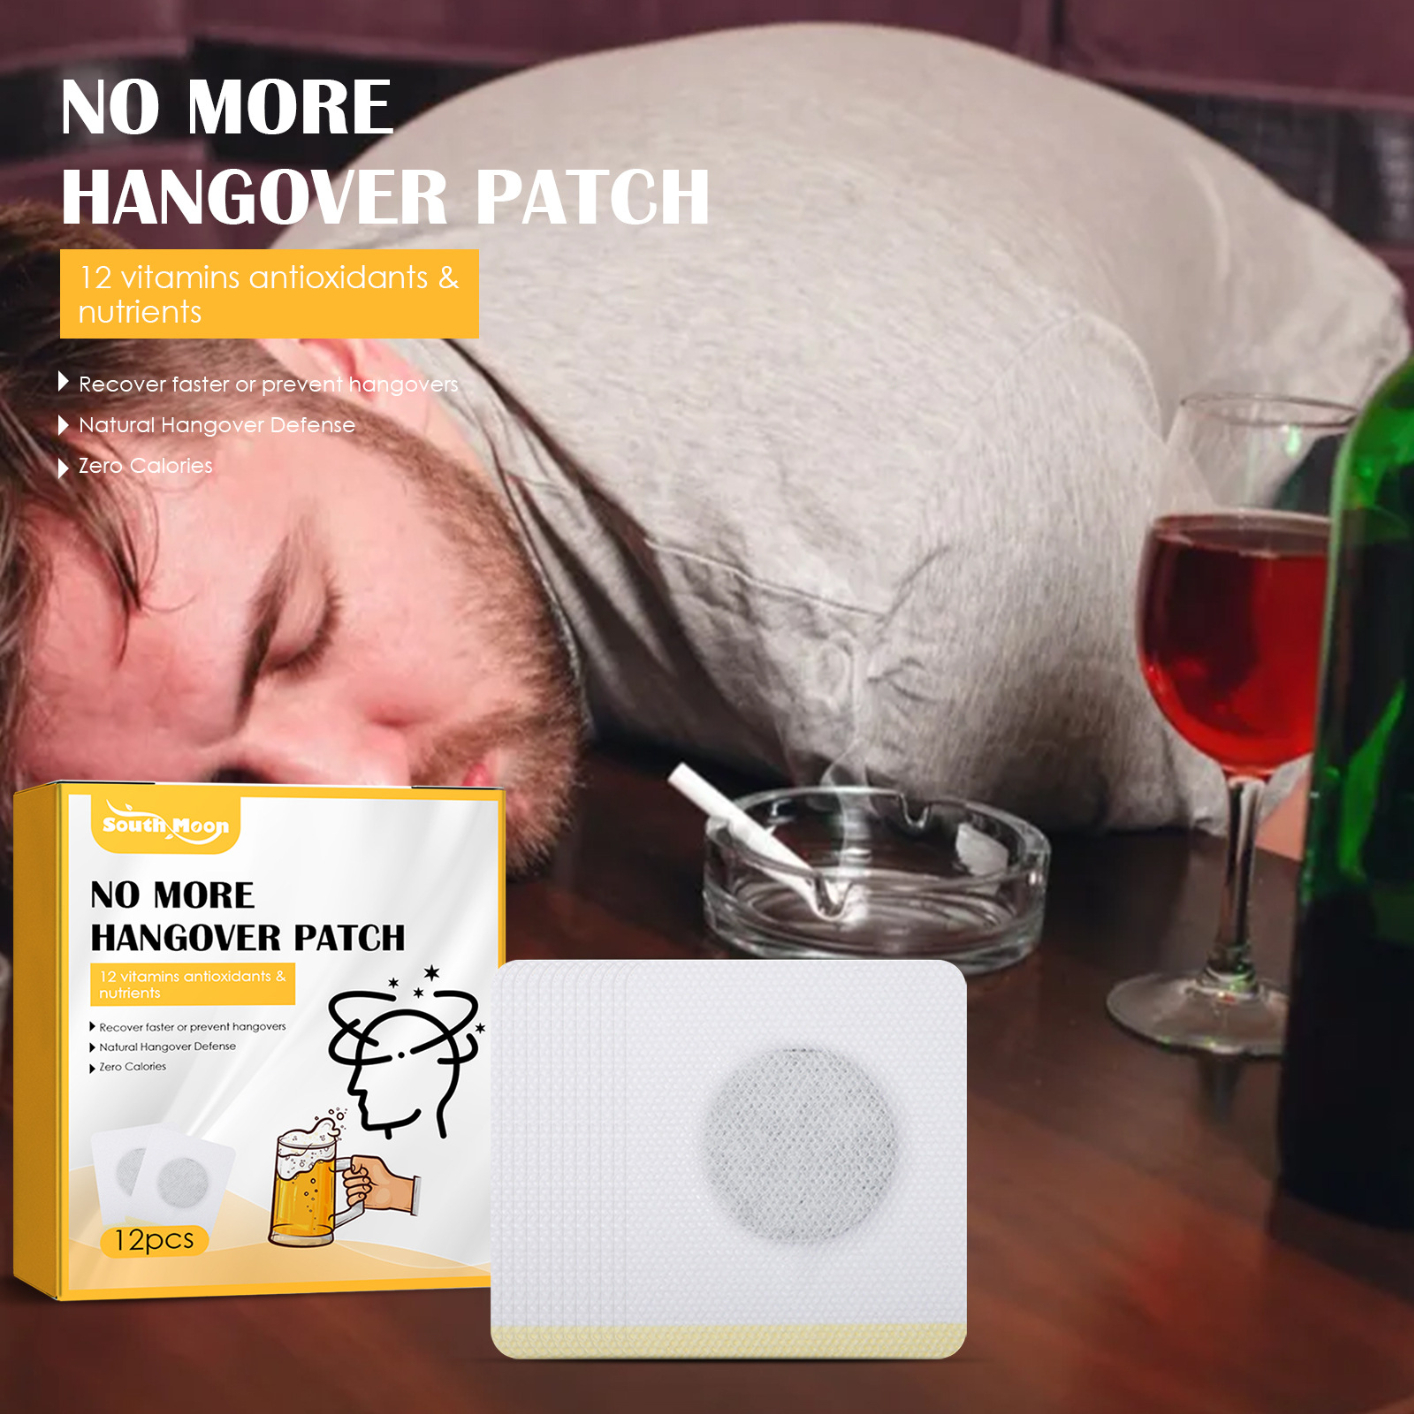 12PCS No More Hangover Patch, Portable Maintenance Health Care Stickers for Acupuncture Point